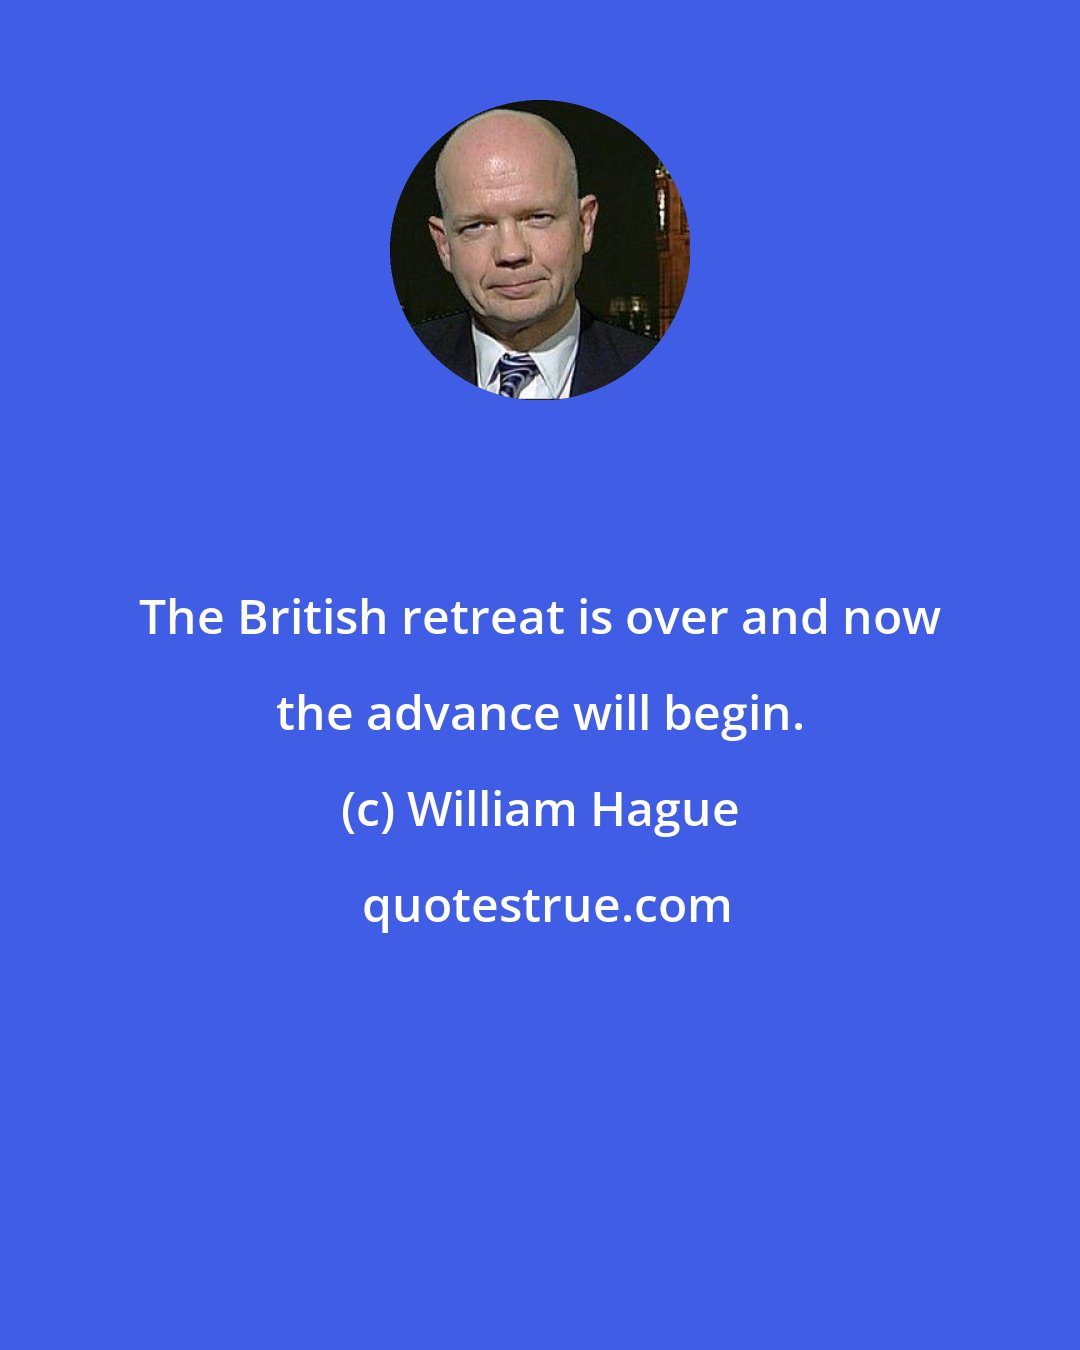 William Hague: The British retreat is over and now the advance will begin.